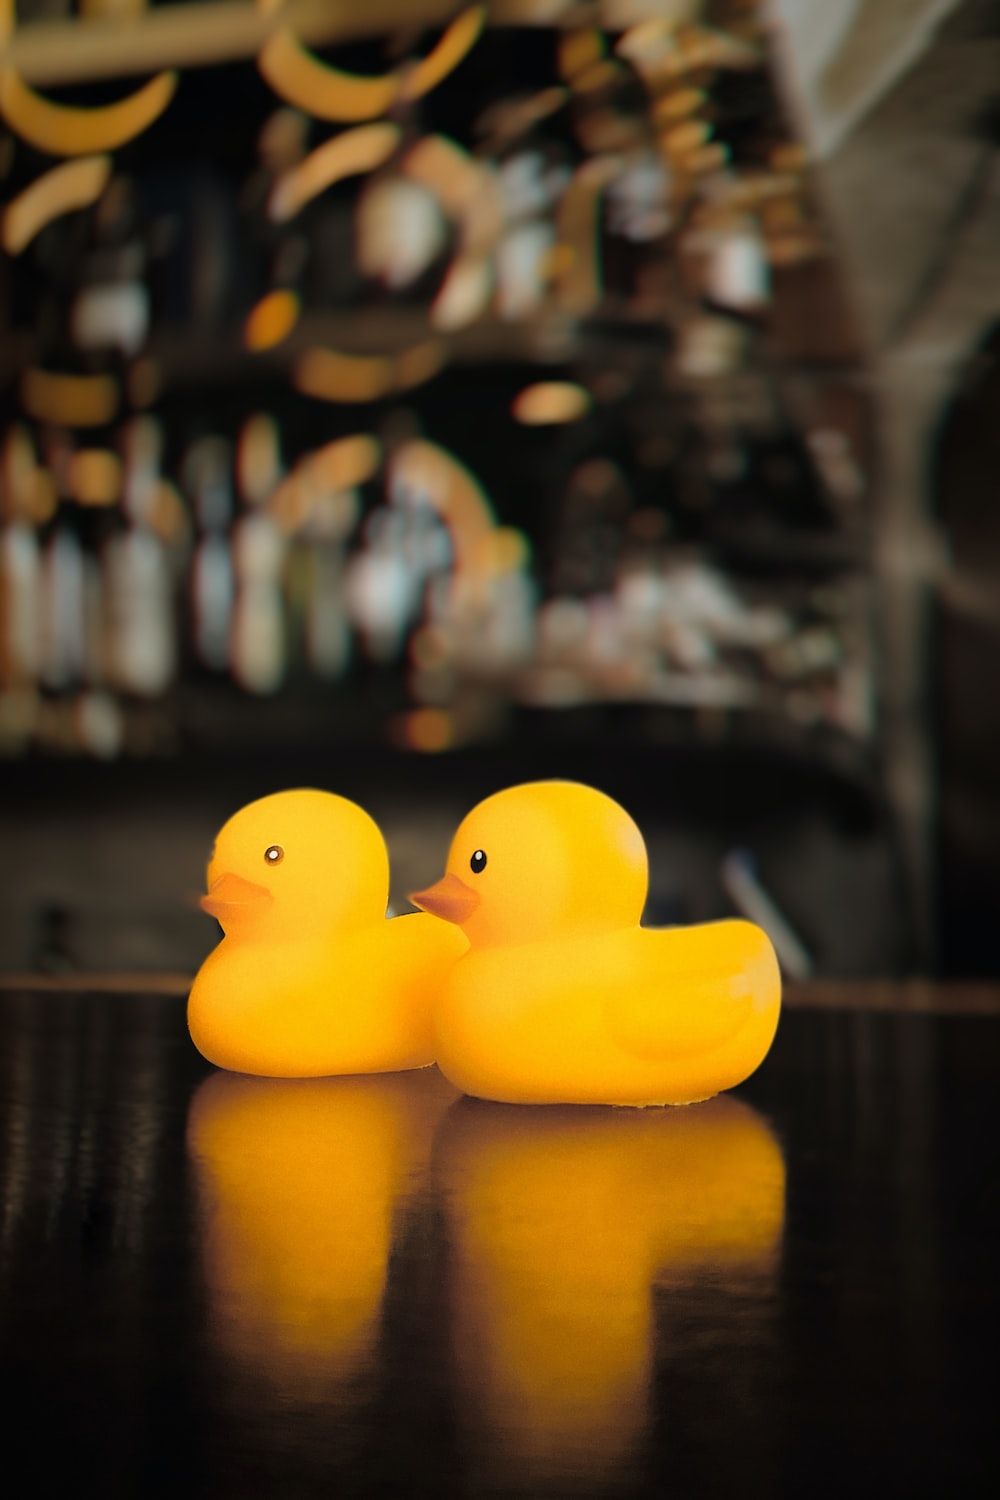 Two yellow rubber ducks on a table - Duck